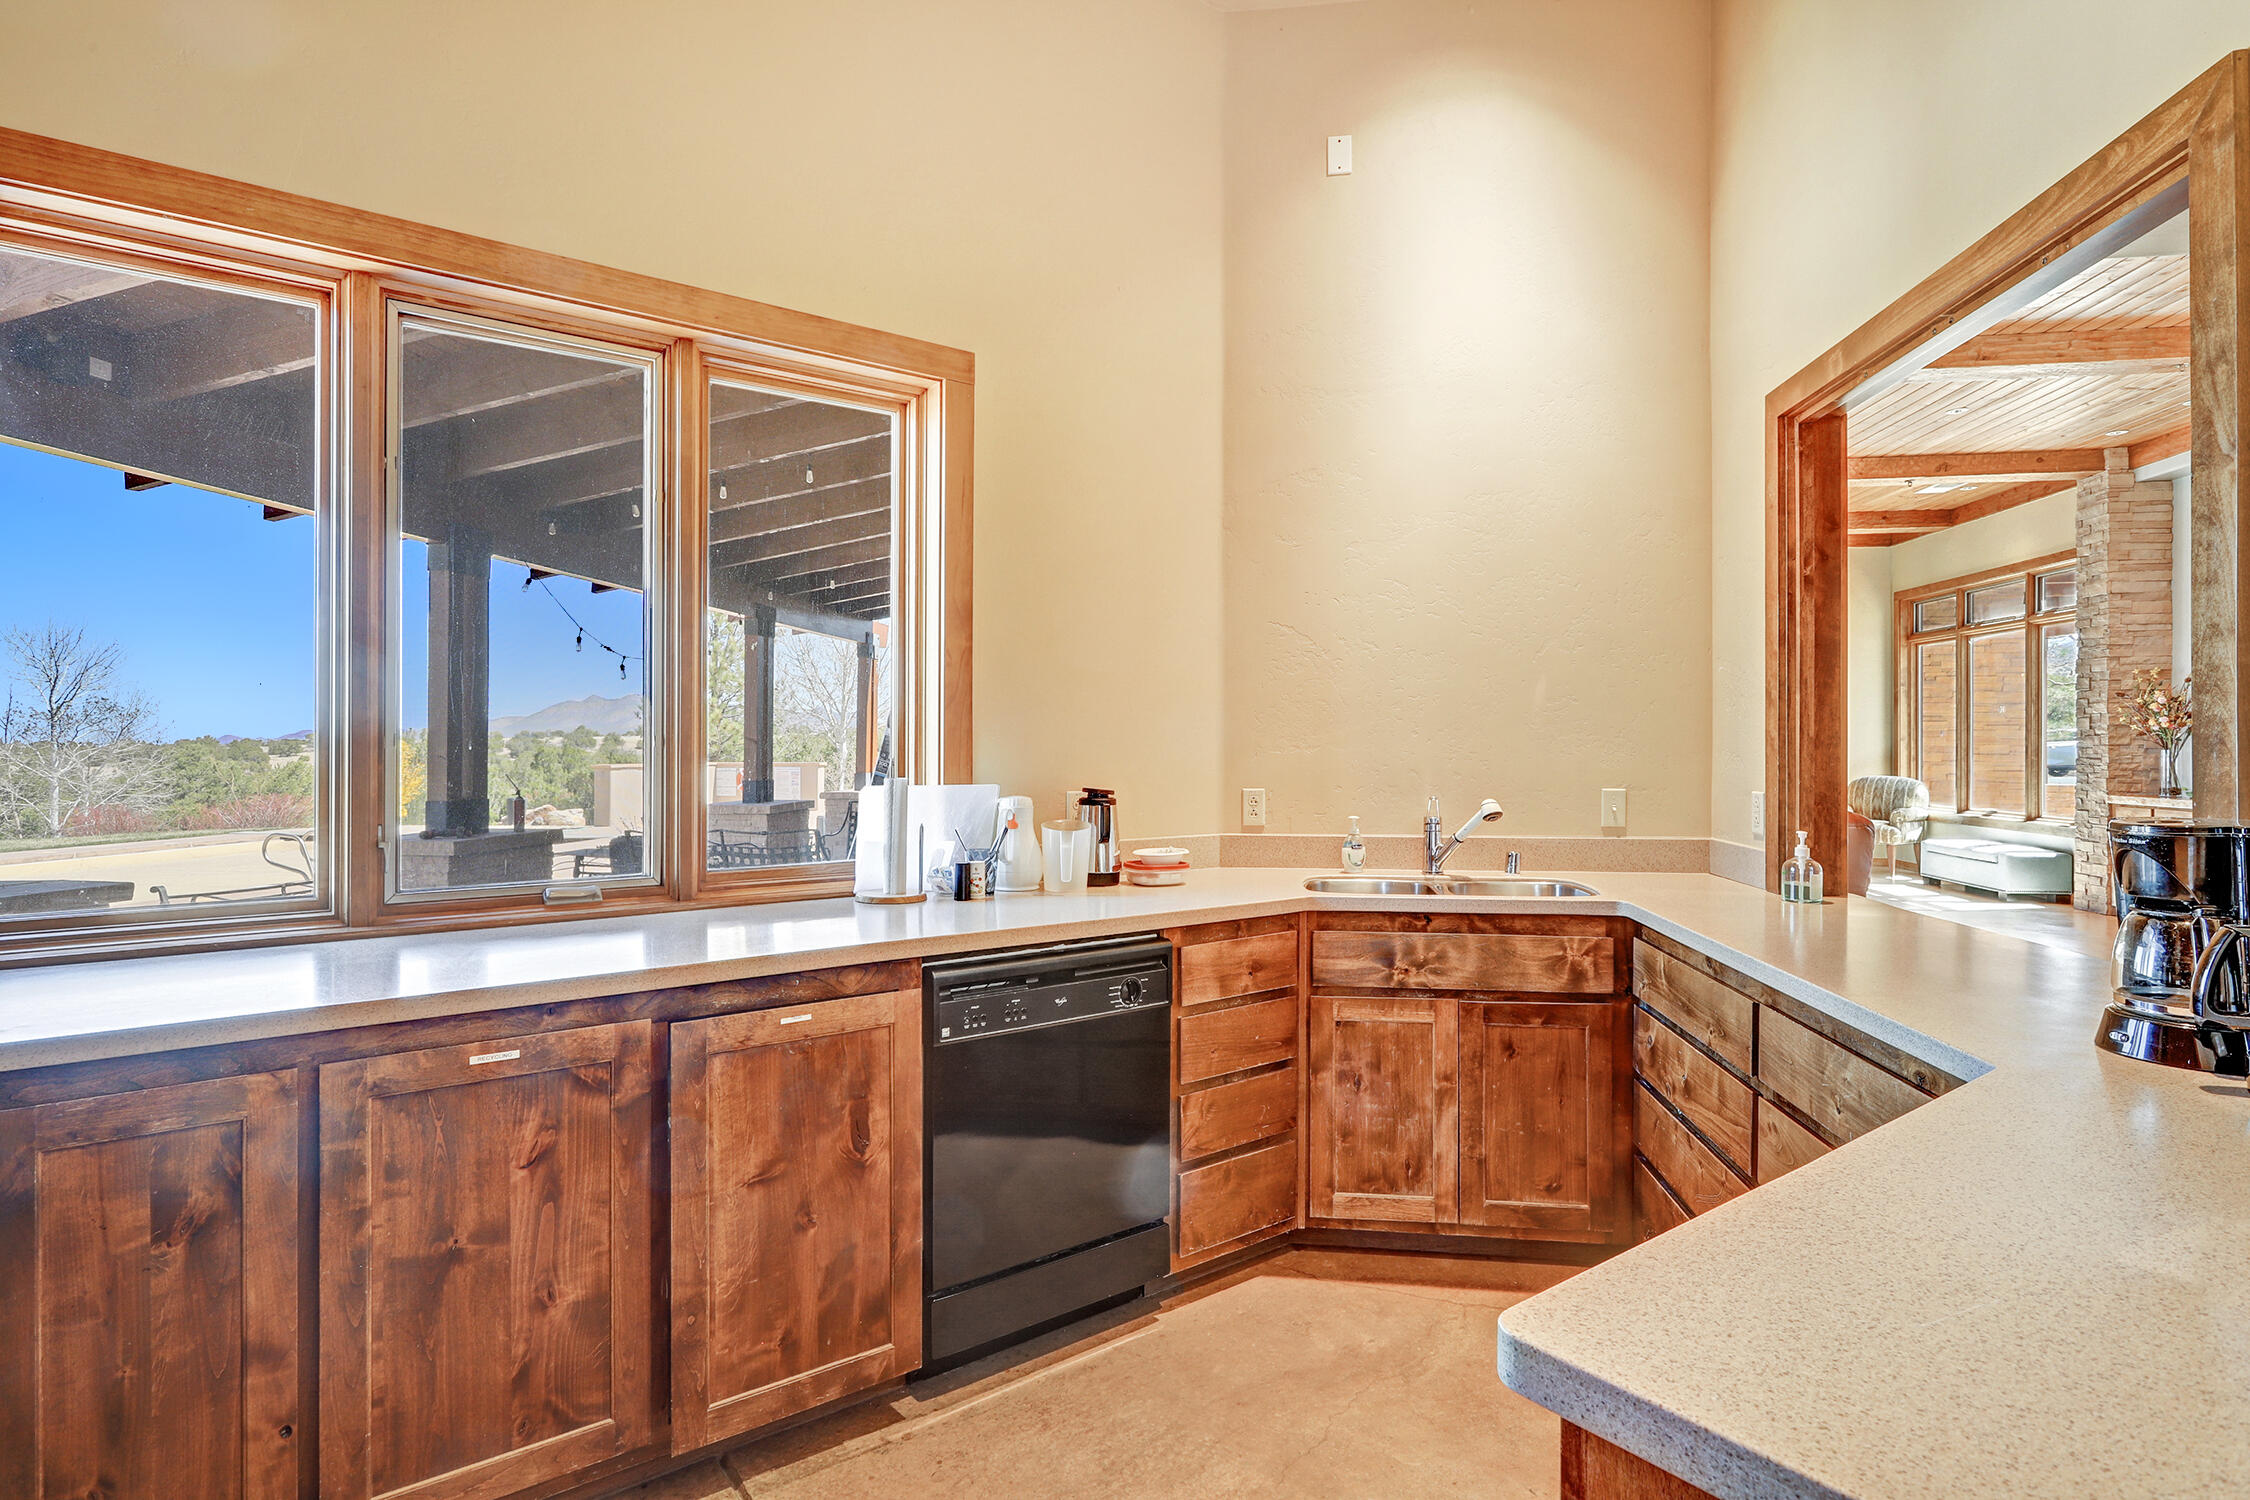 30 Turquoise Drive, Sandia Park, New Mexico 87047, 3 Bedrooms Bedrooms, ,3 BathroomsBathrooms,Residential,For Sale,30 Turquoise Drive,1061203